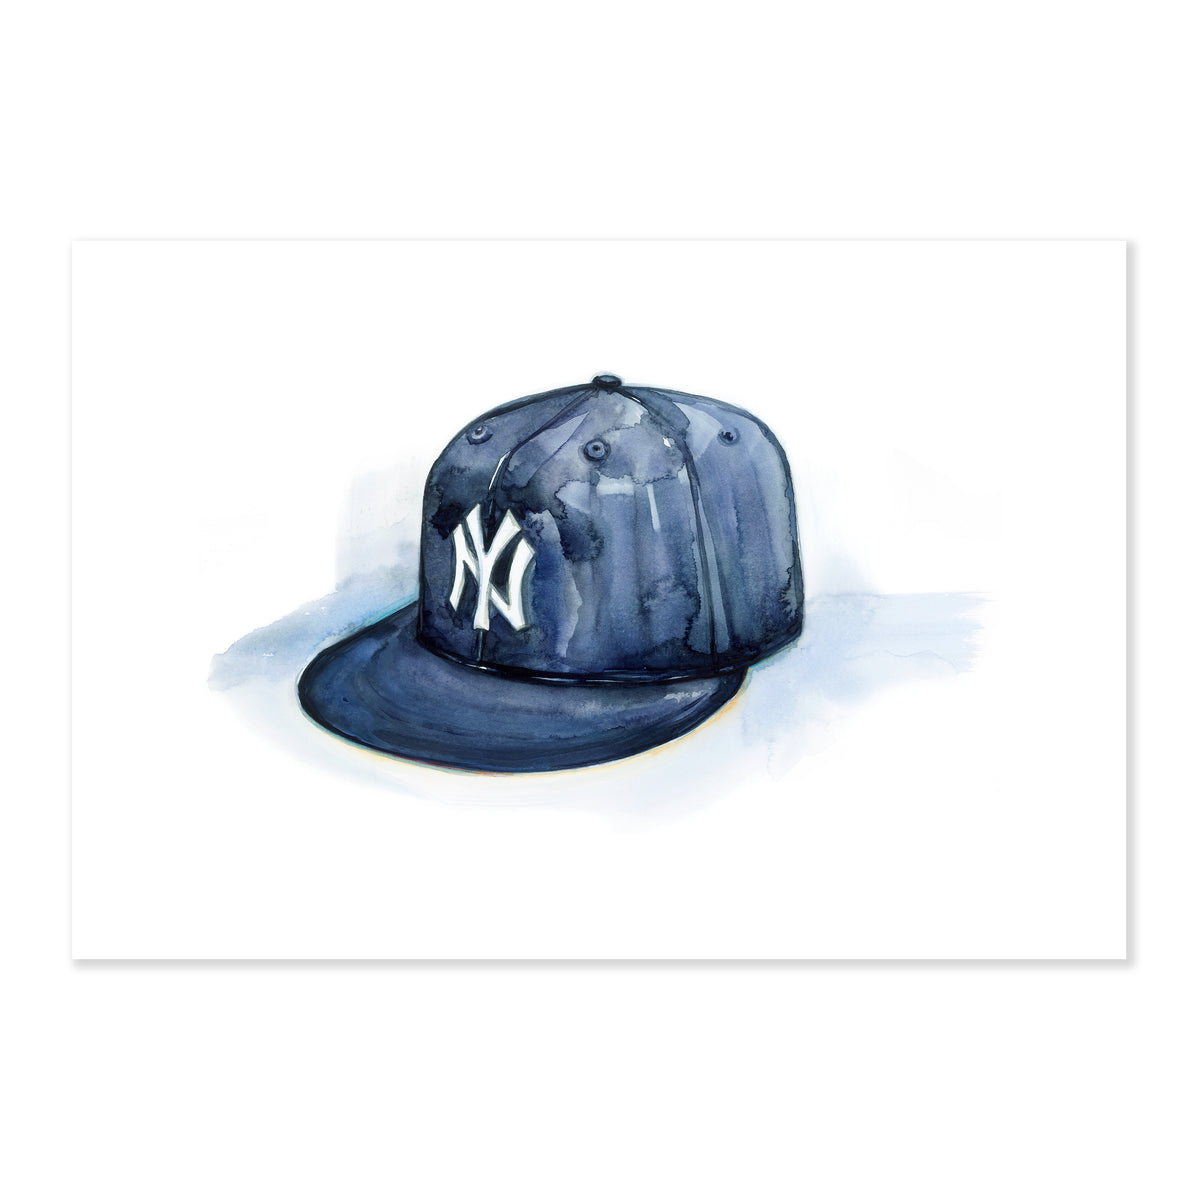  A fine art print illustrating a blue cap featuring white text that reads NY painted with watercolor on a soft white background